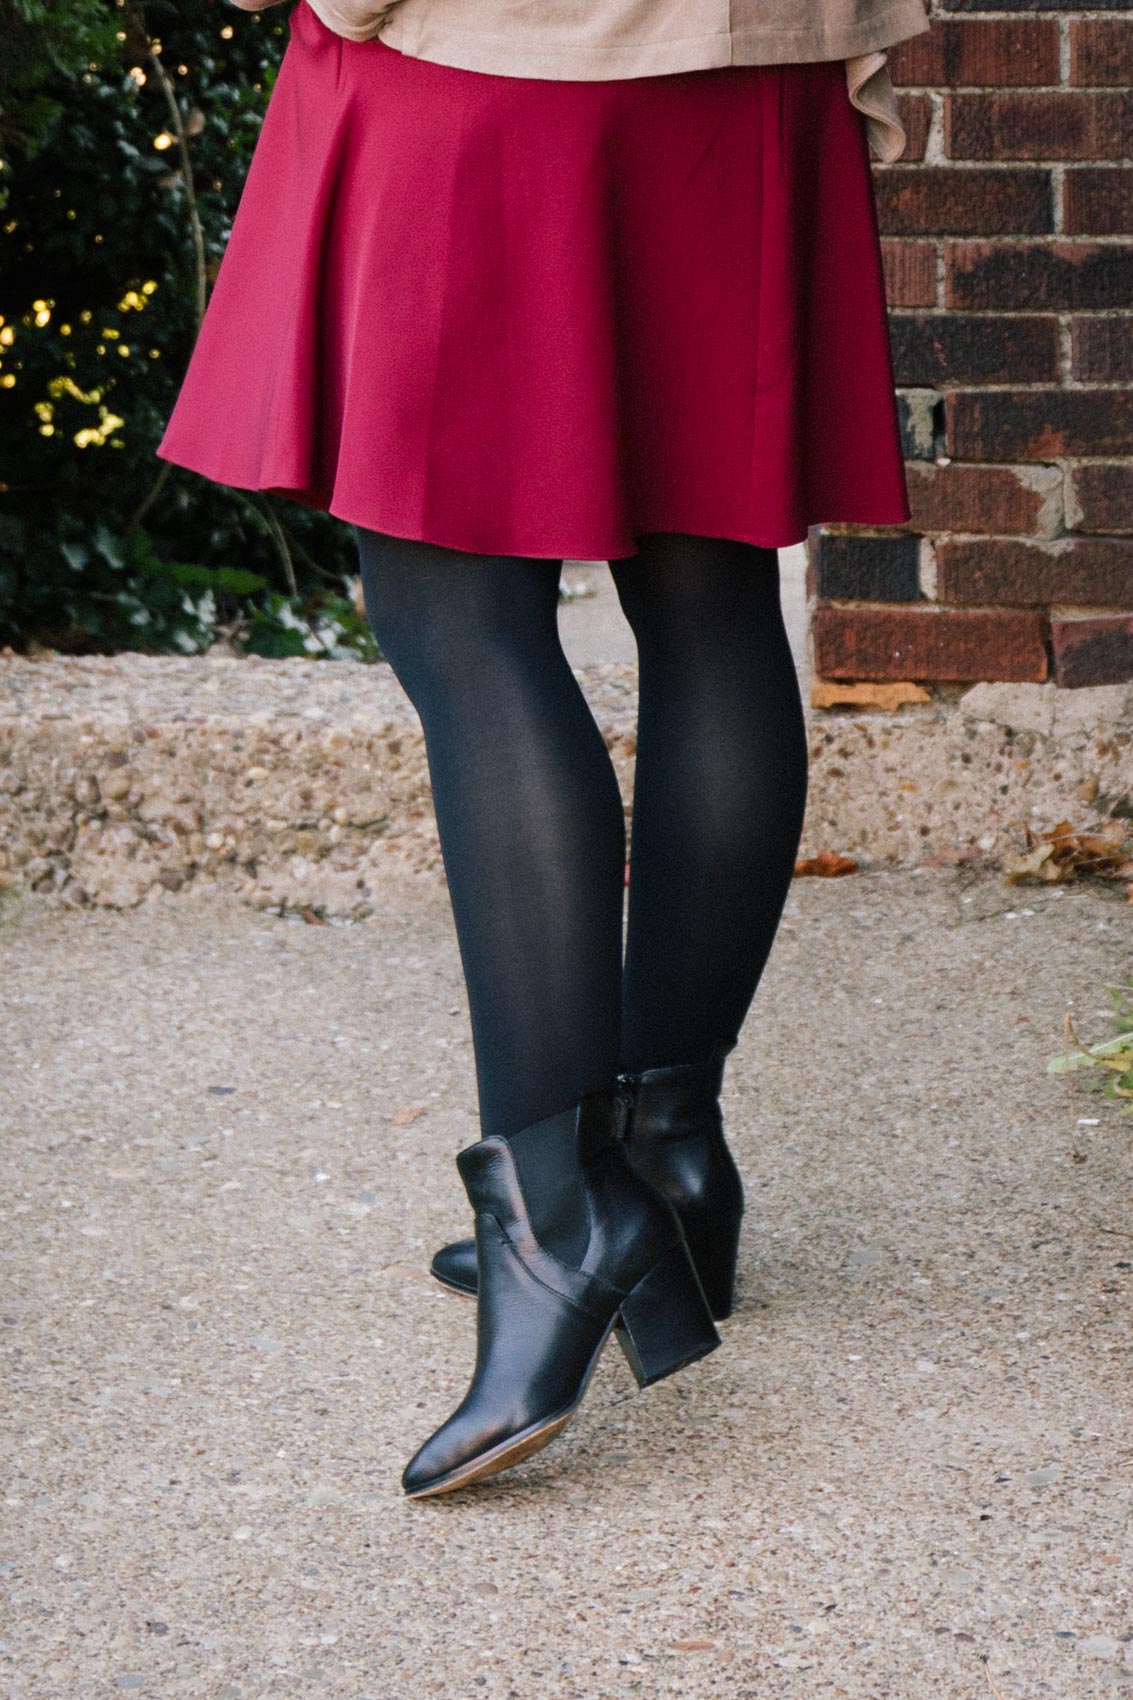 Red Dress with Black Tights Outfit - Allyn Lewis